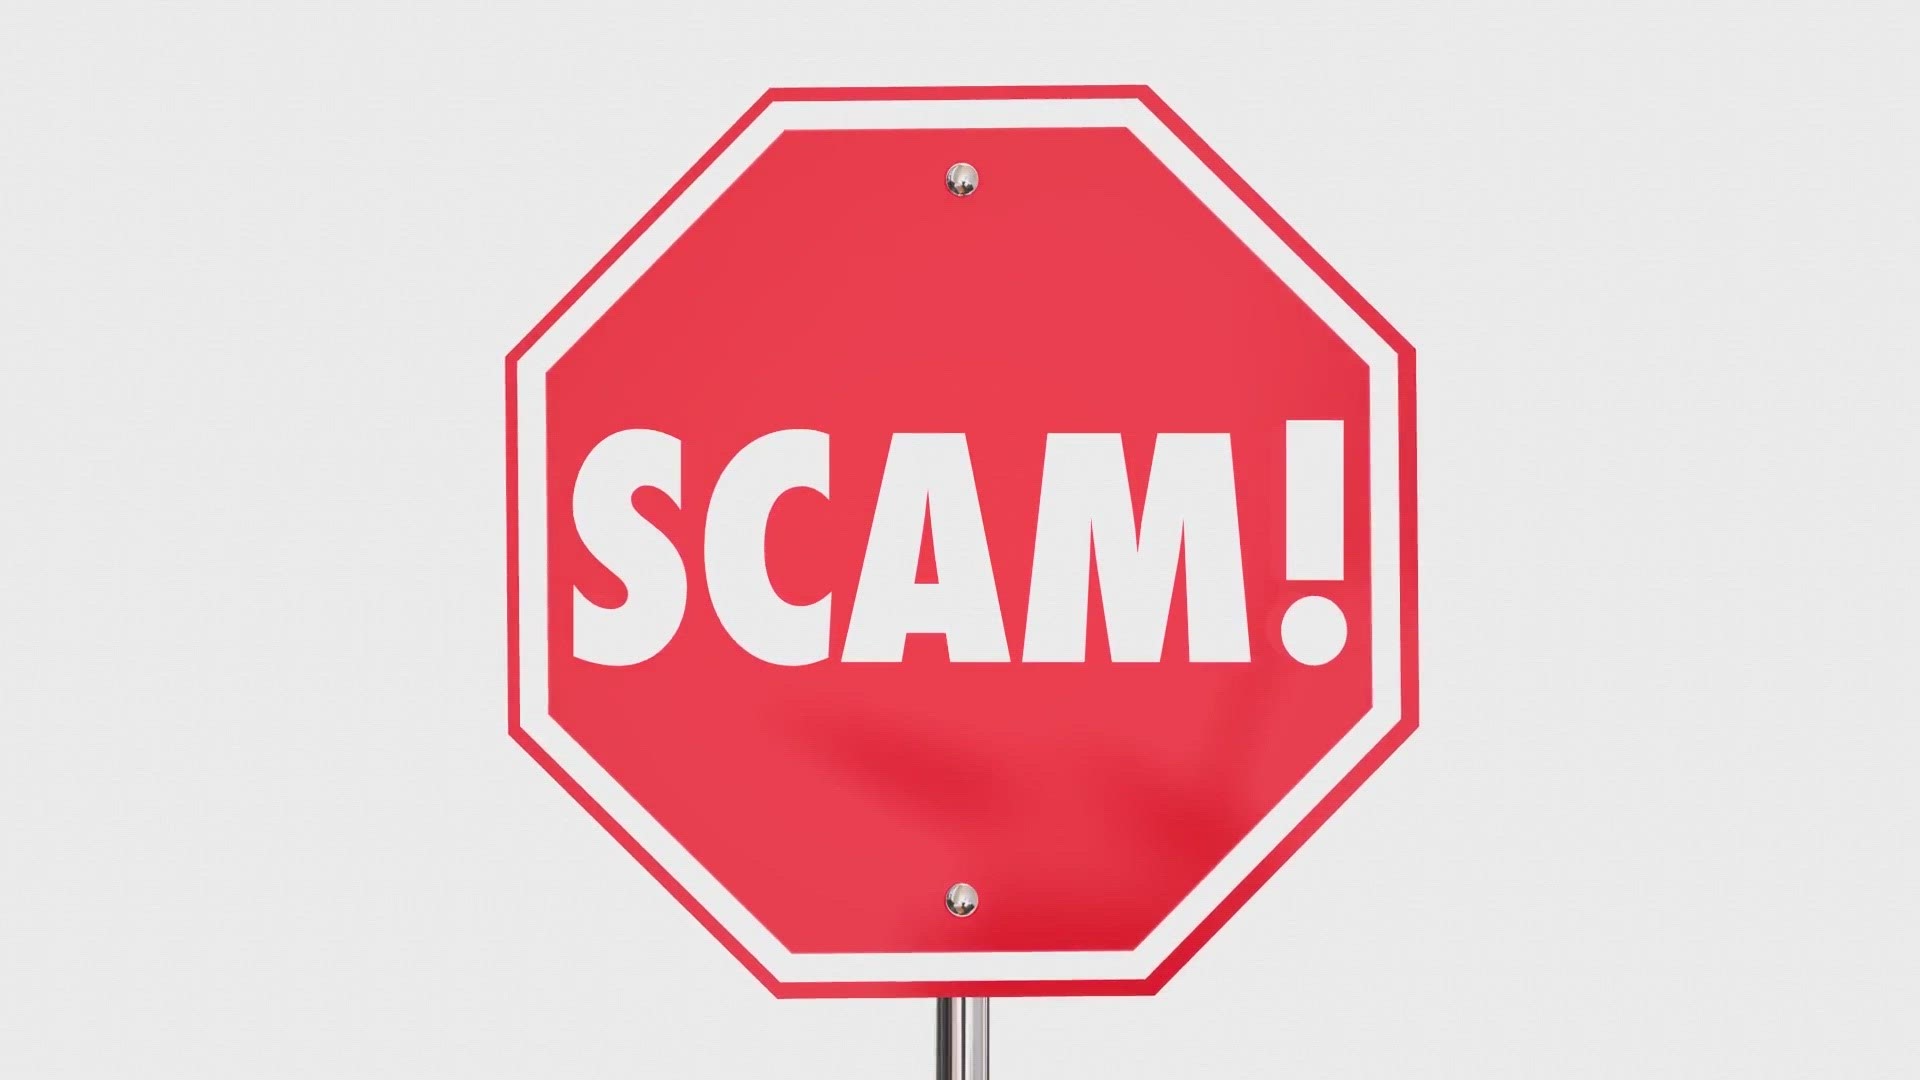 From fake tech support to allegations of lewd images, here are some common online scams to look out for.